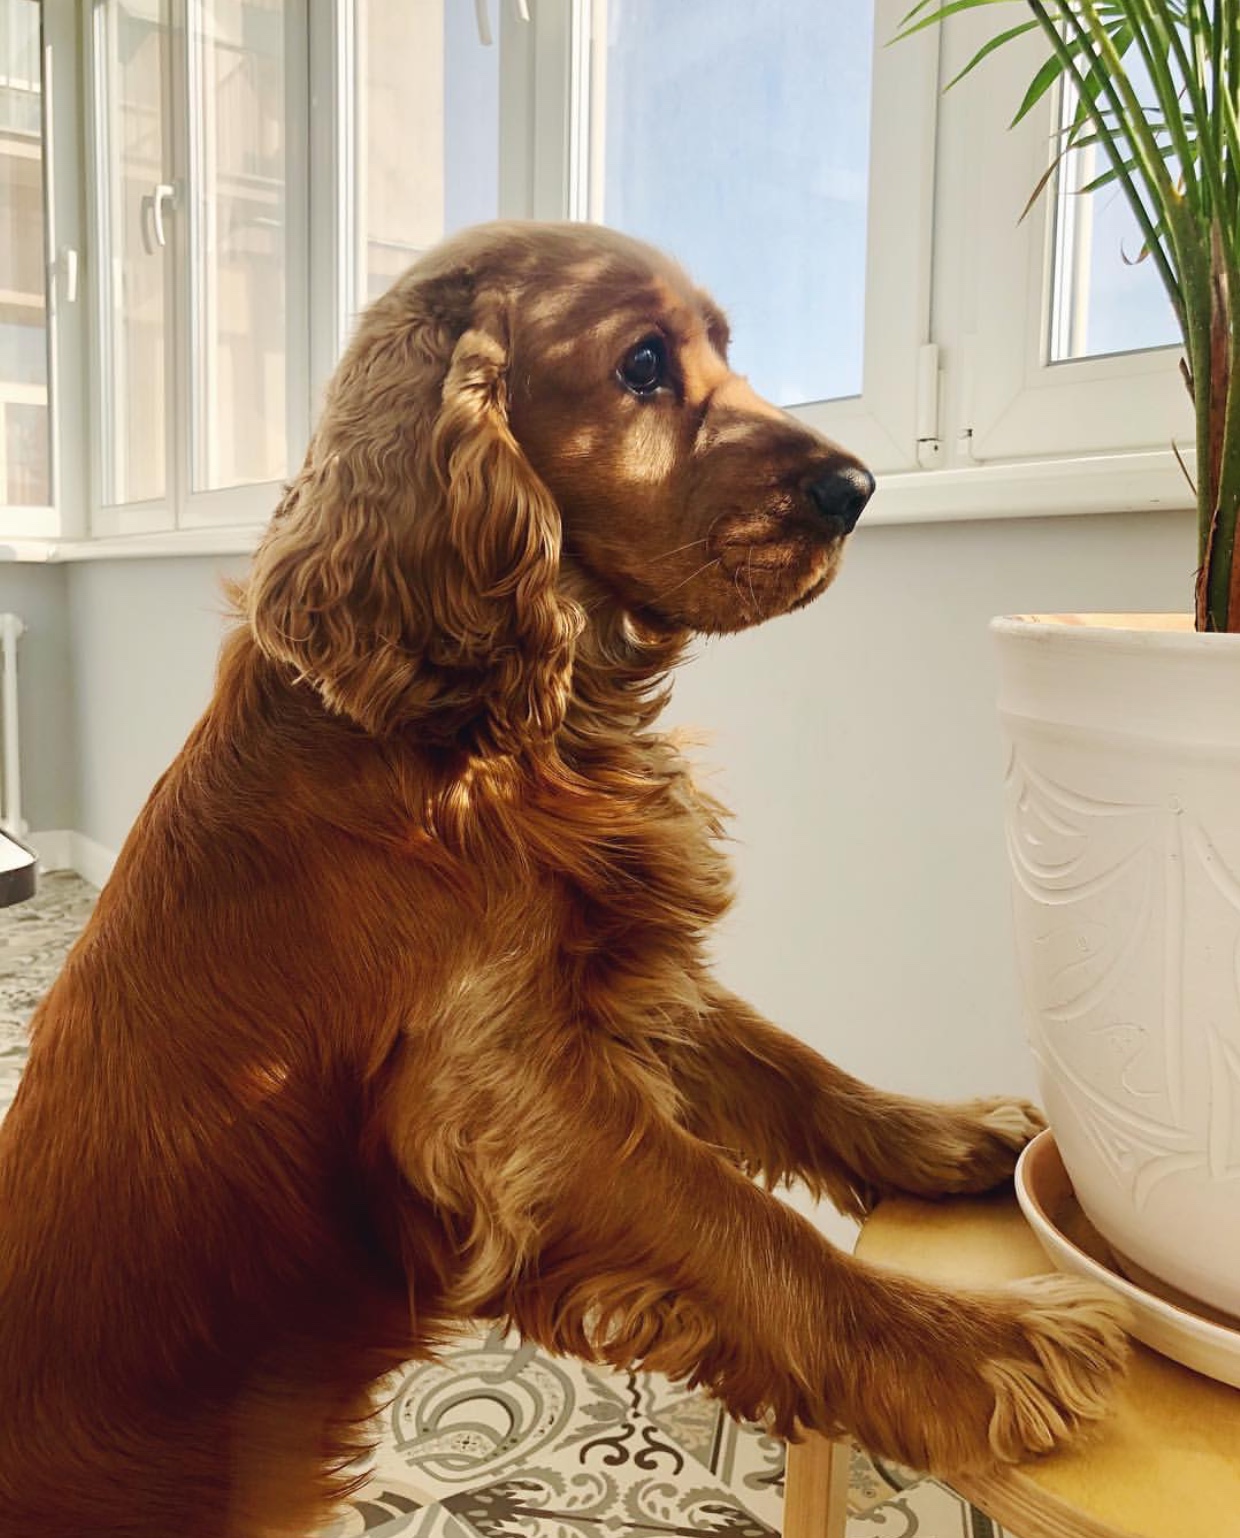 A Cocker Spaniel puppy standing up leaning towards the table with a potted plant on top while staring outside the window